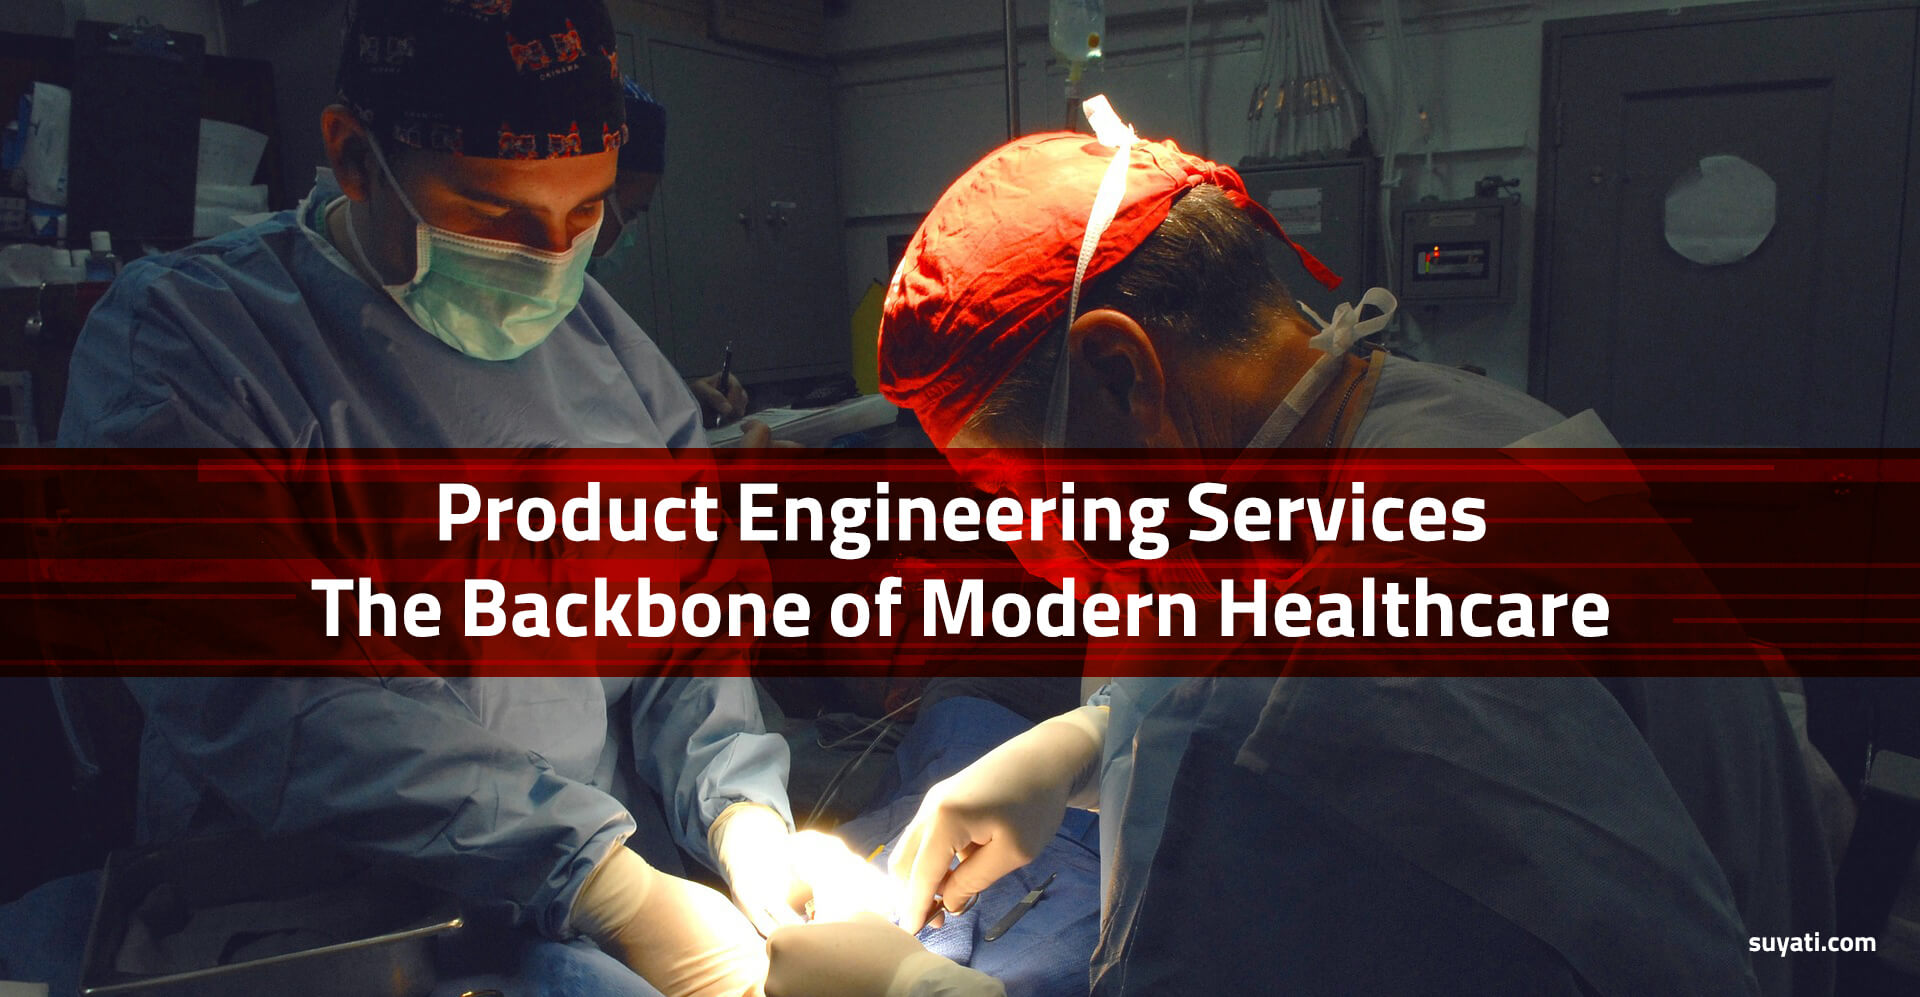 Product Engineering Services in healthcare